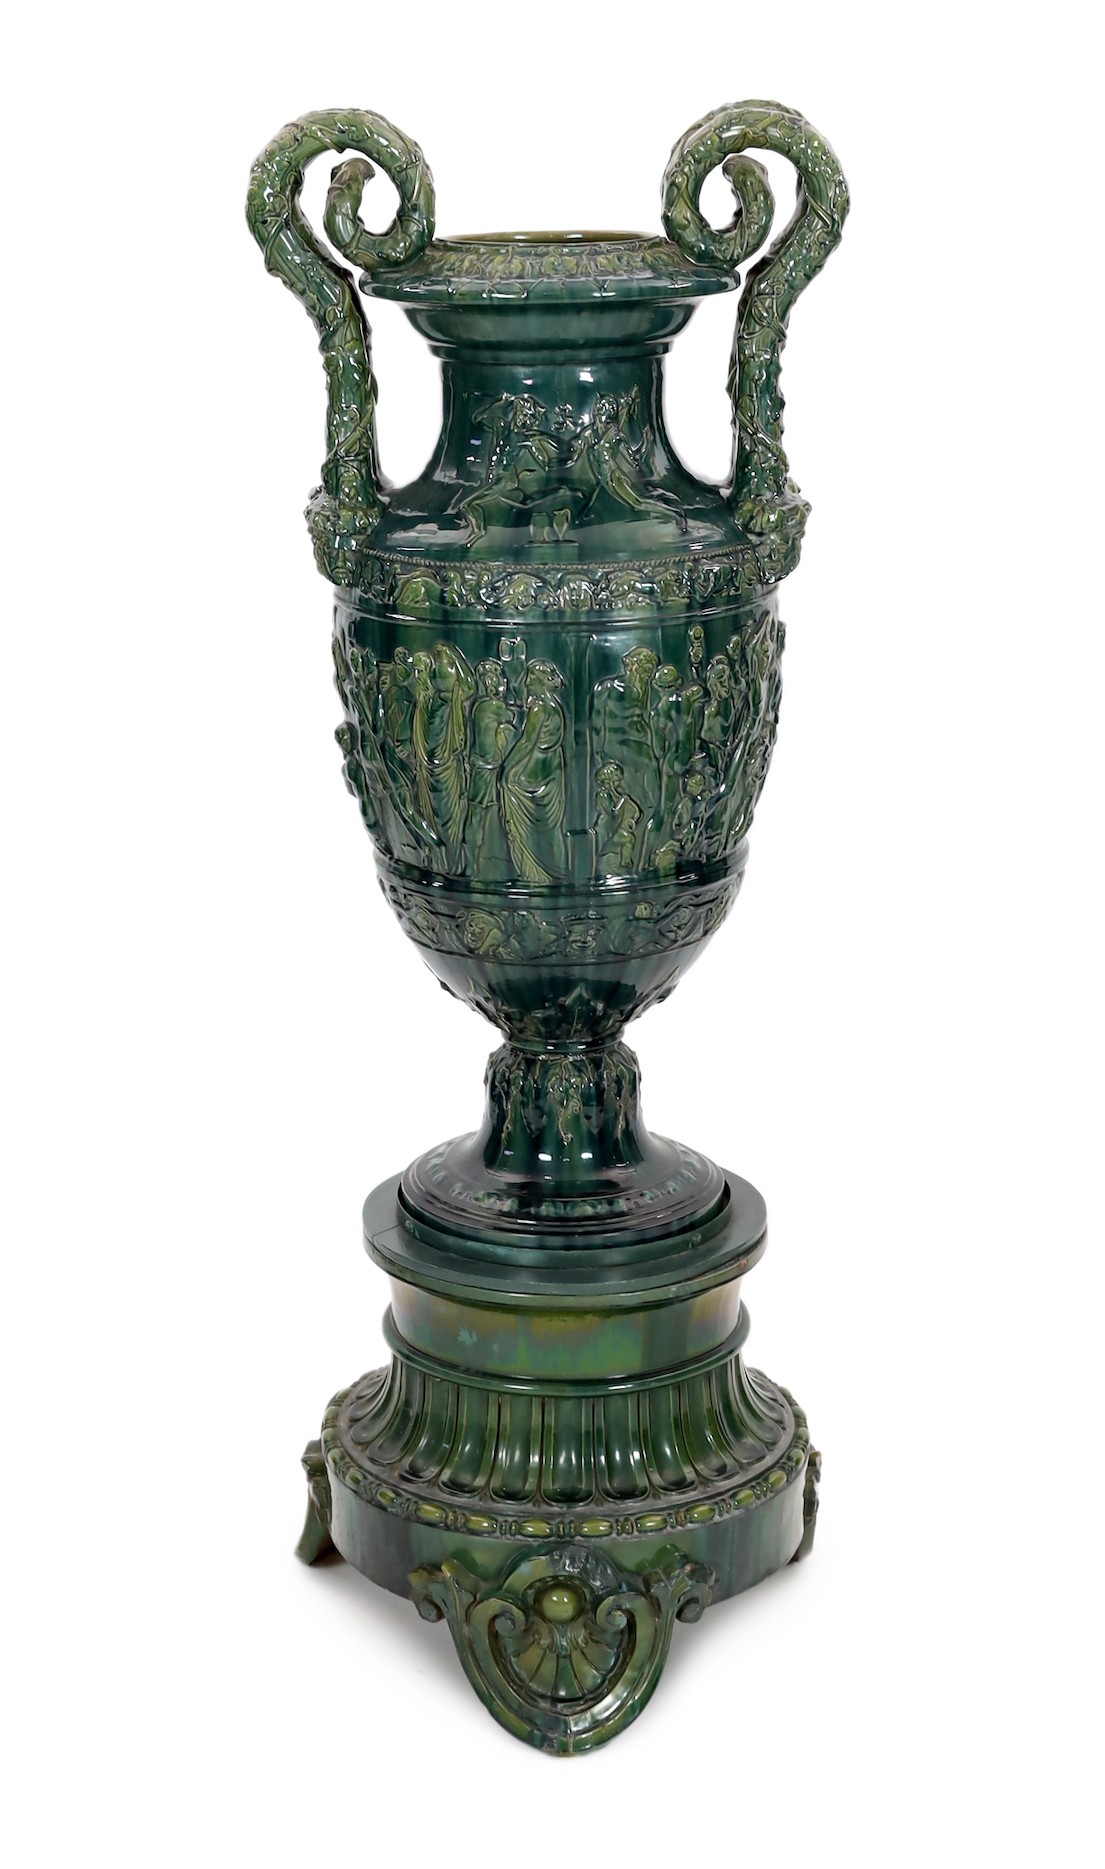 A massive Continental majolica green glazed campana vase and associated stand, late 19th century, total height 153cm, small repairs                                                                                         